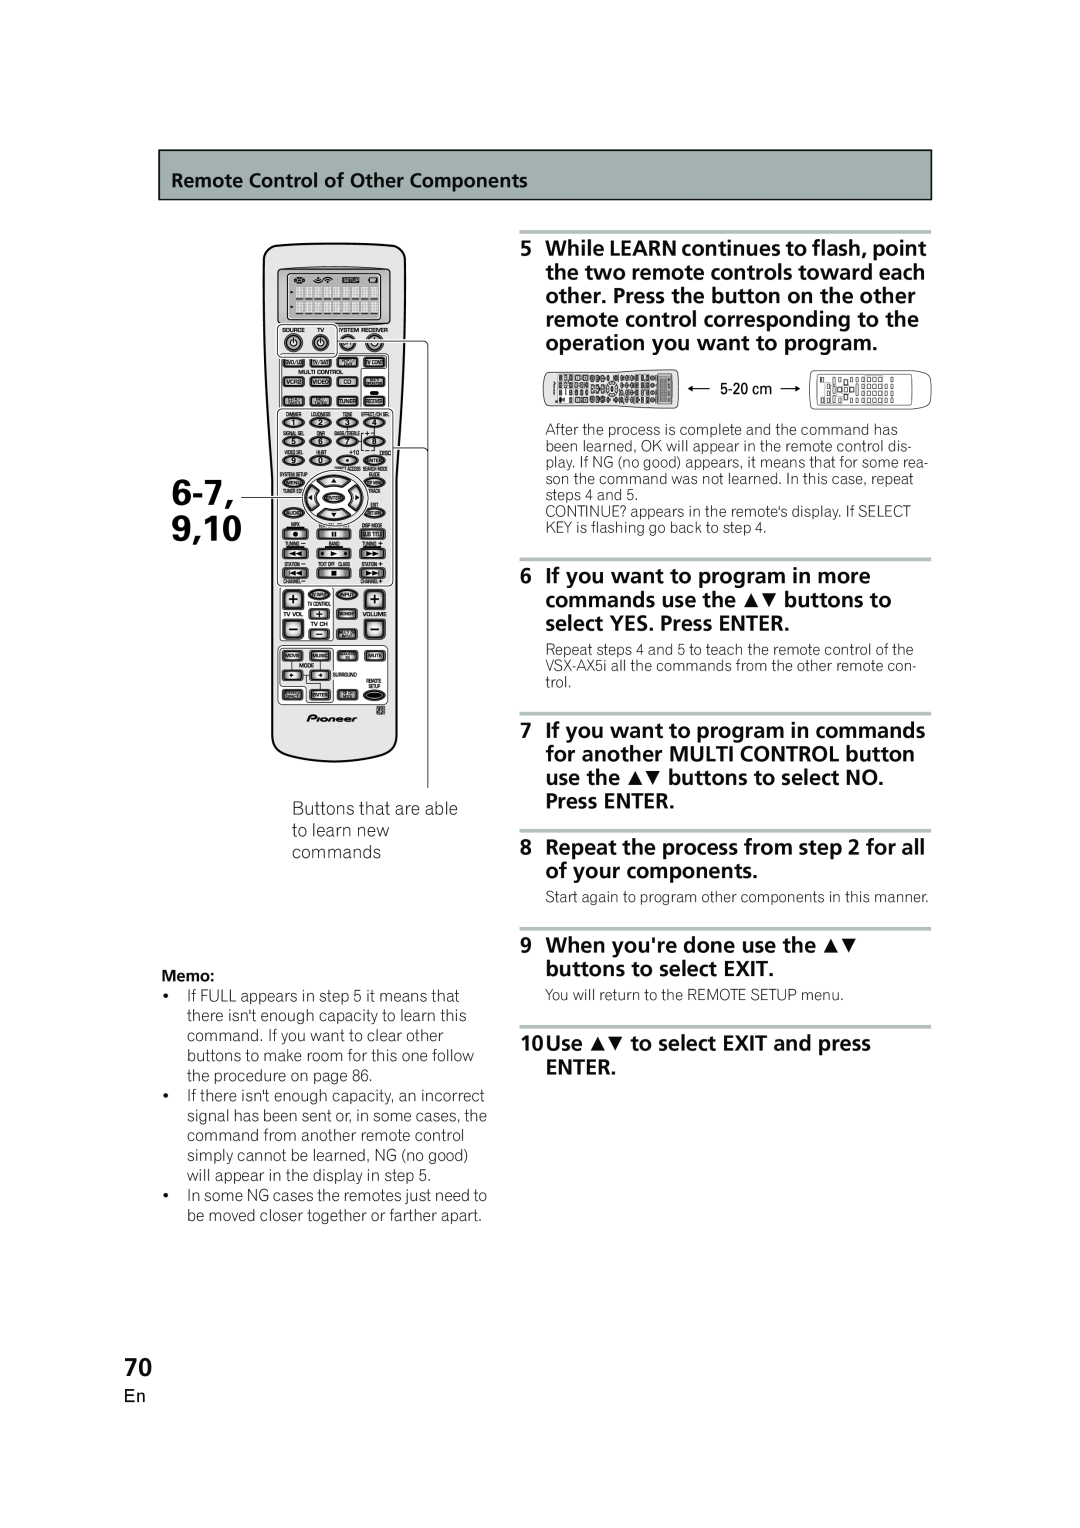 Pioneer VSX-AX5i-G manual Press ENTER, 10Use  to select EXIT and press ENTER, Remote Control of Other Components, Memo 